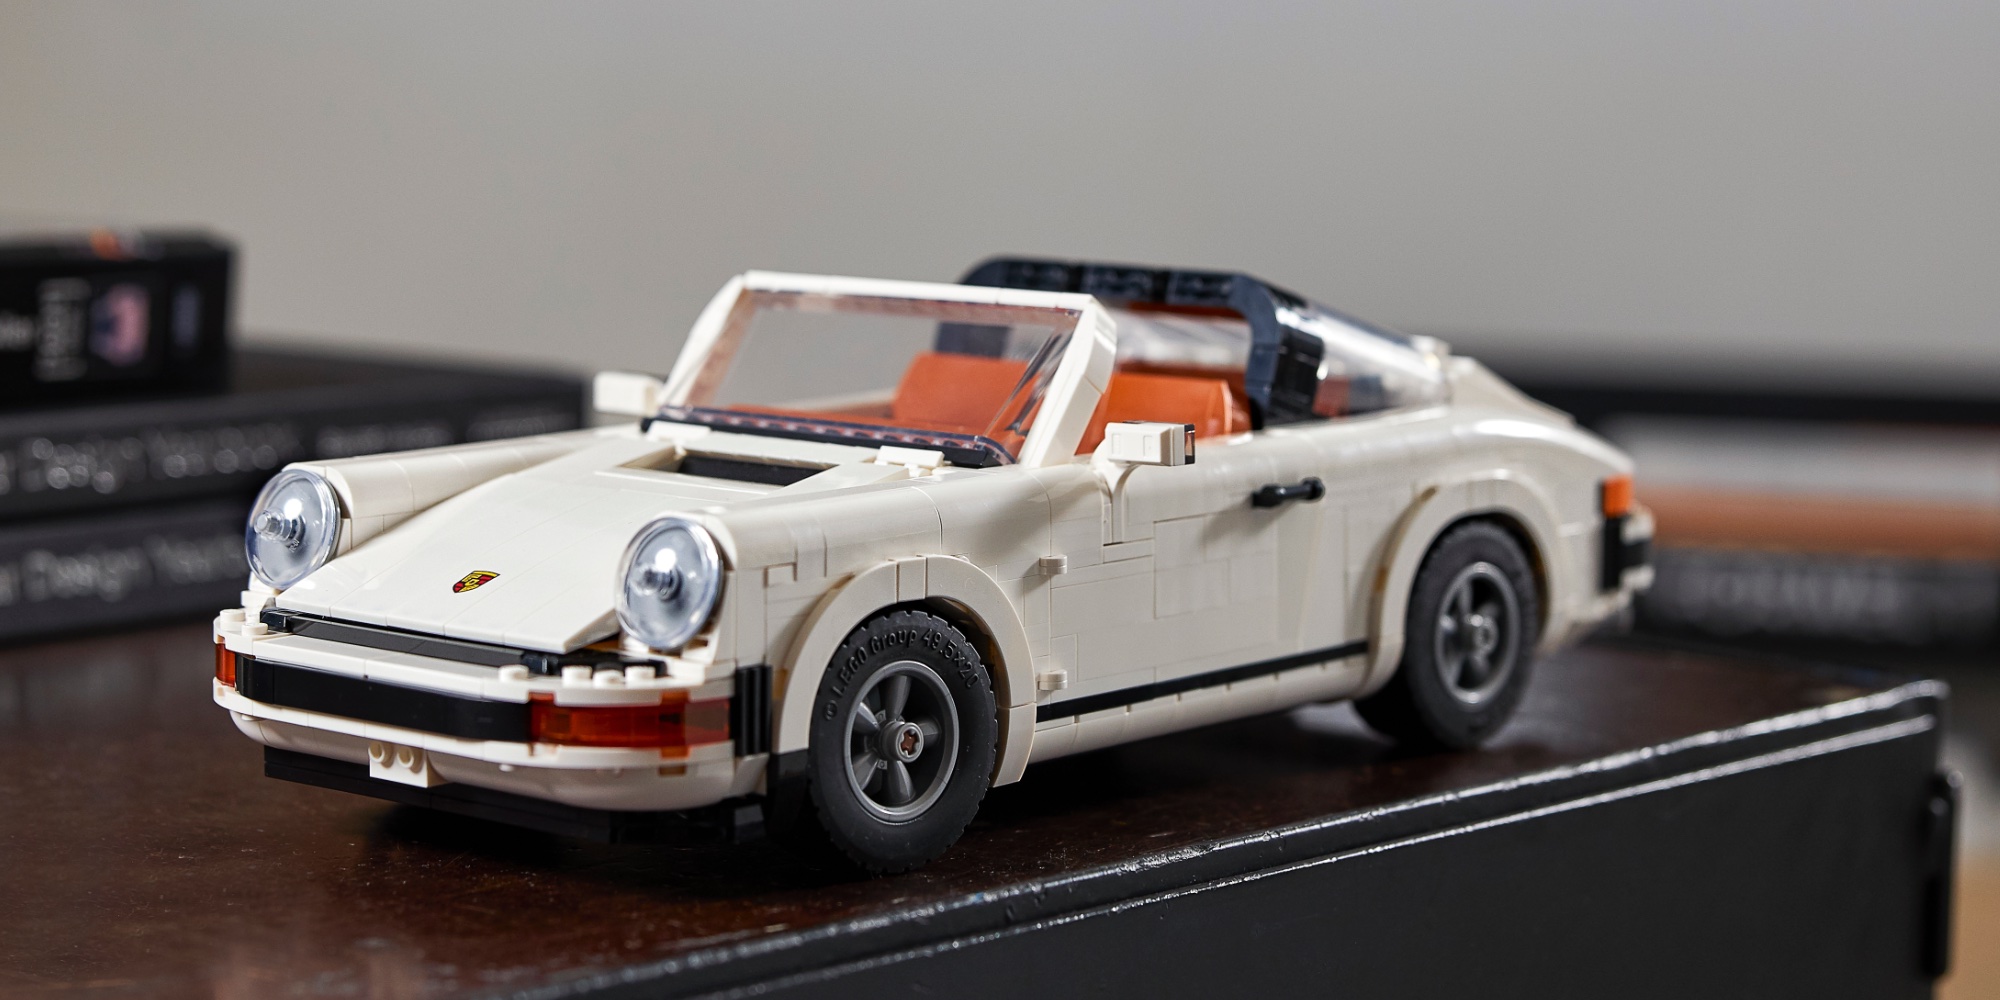 LEGO's new 1,458-piece Porsche 911 sports car sees very first discount to  $135